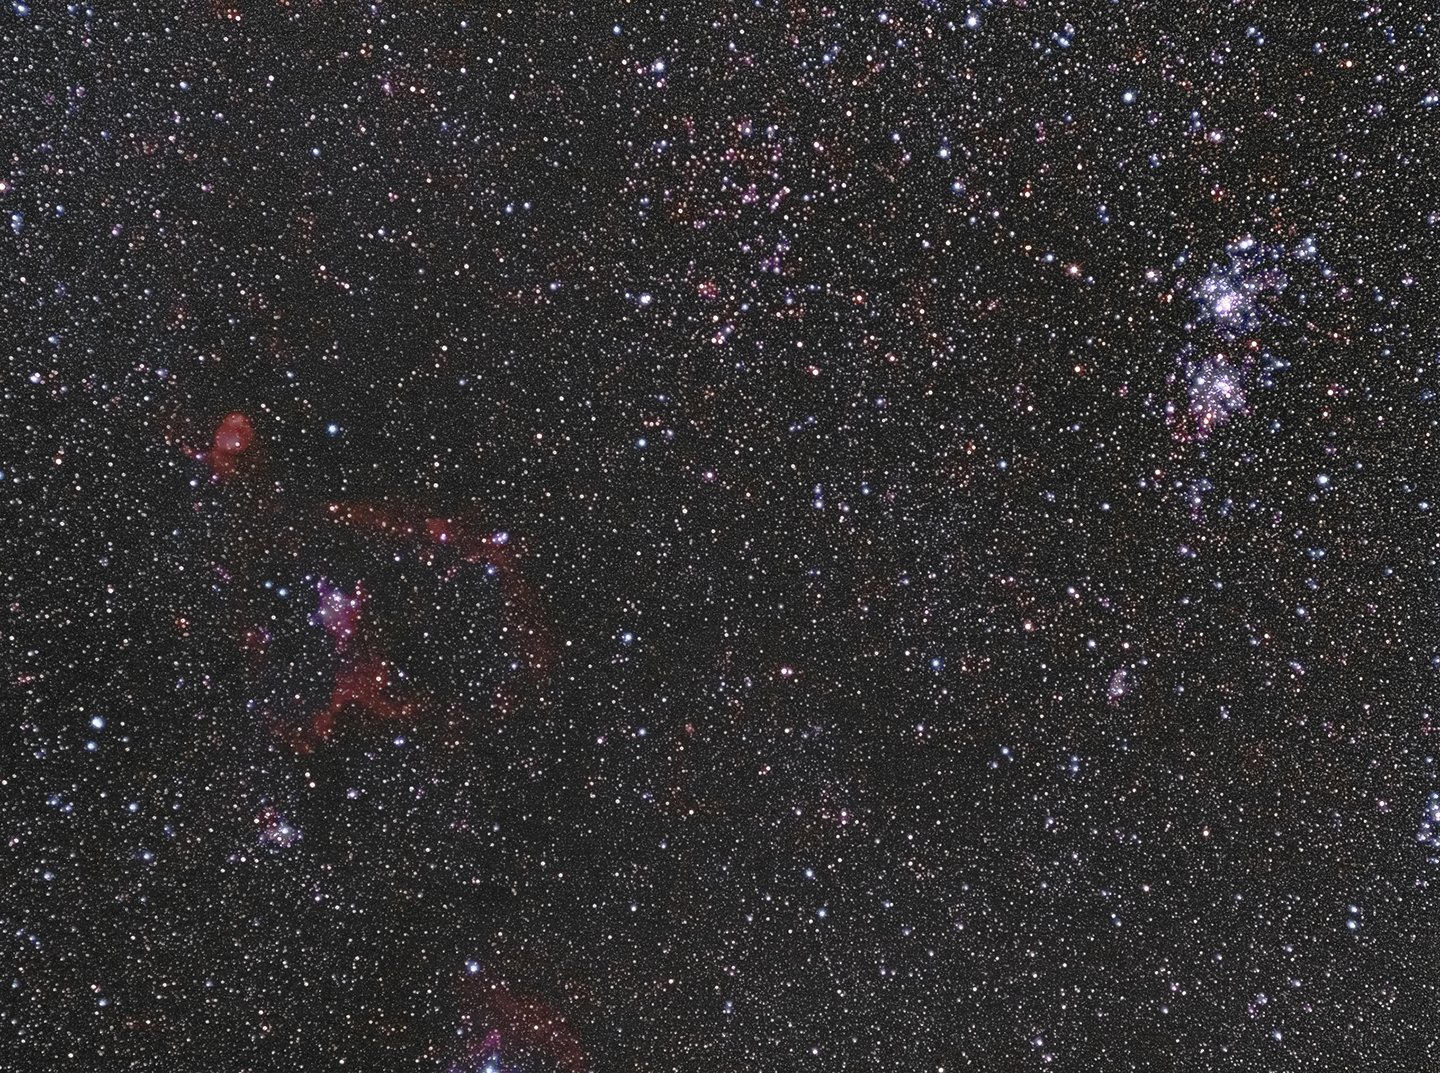 A night sky densely filled with stars as an example. of astrophotography